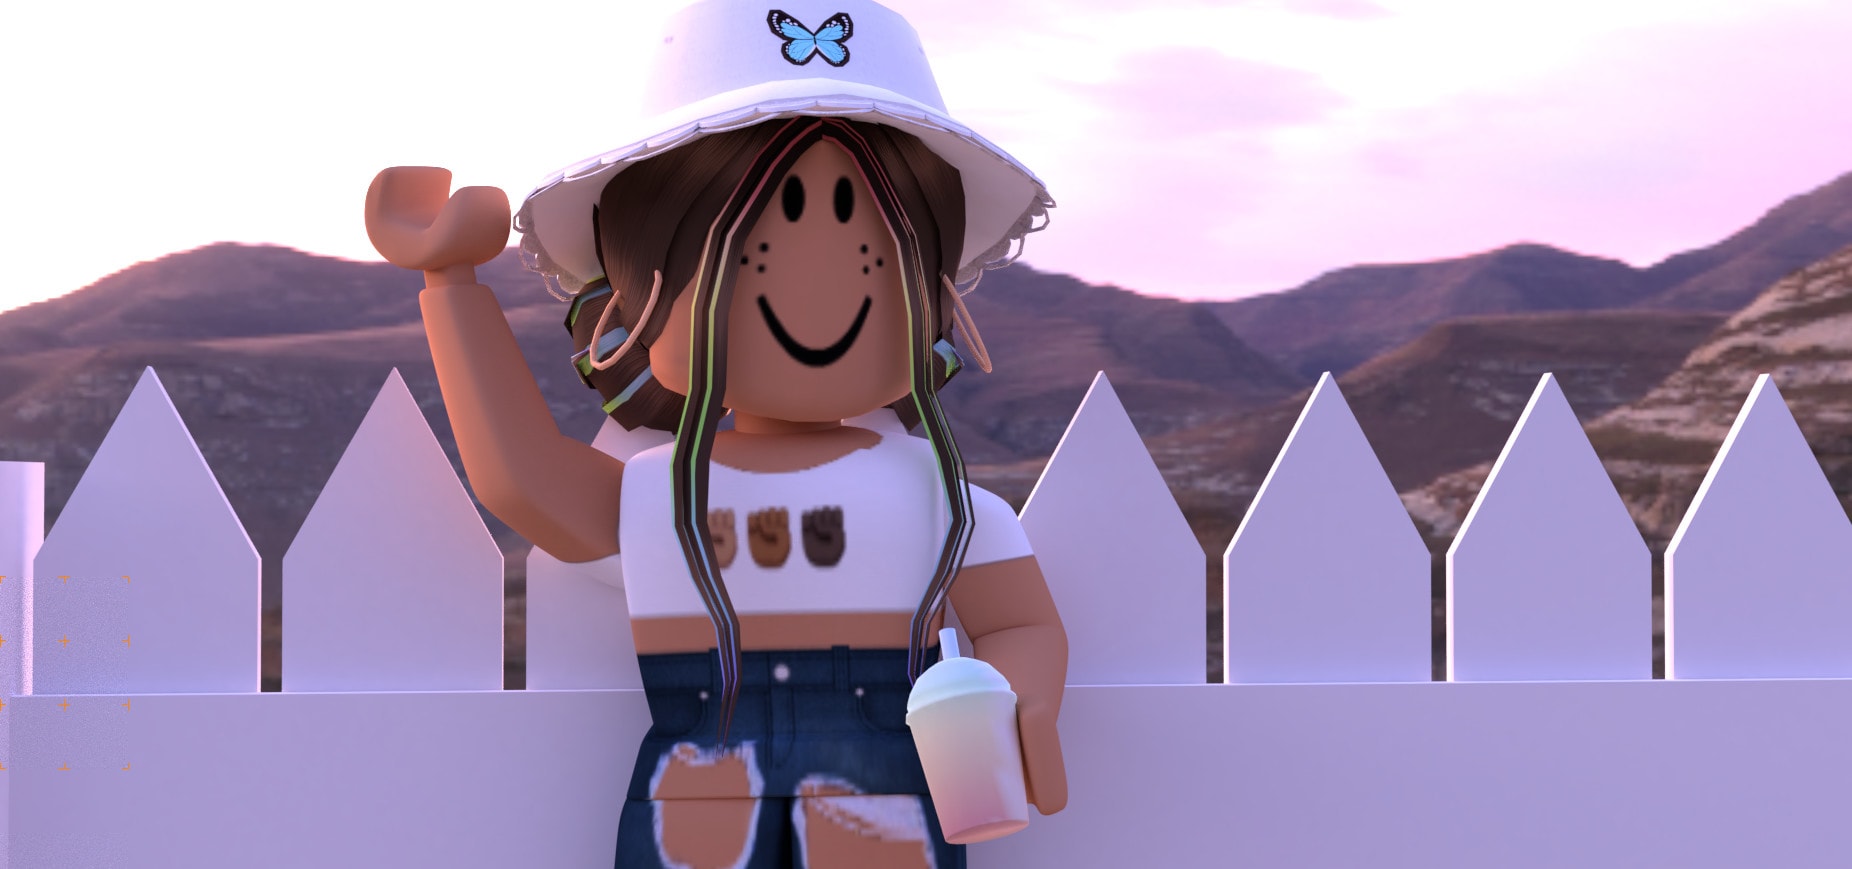 Make An Aesthetic Roblox Gfx By Mxylea - aesthetic female two roblox girls gfx